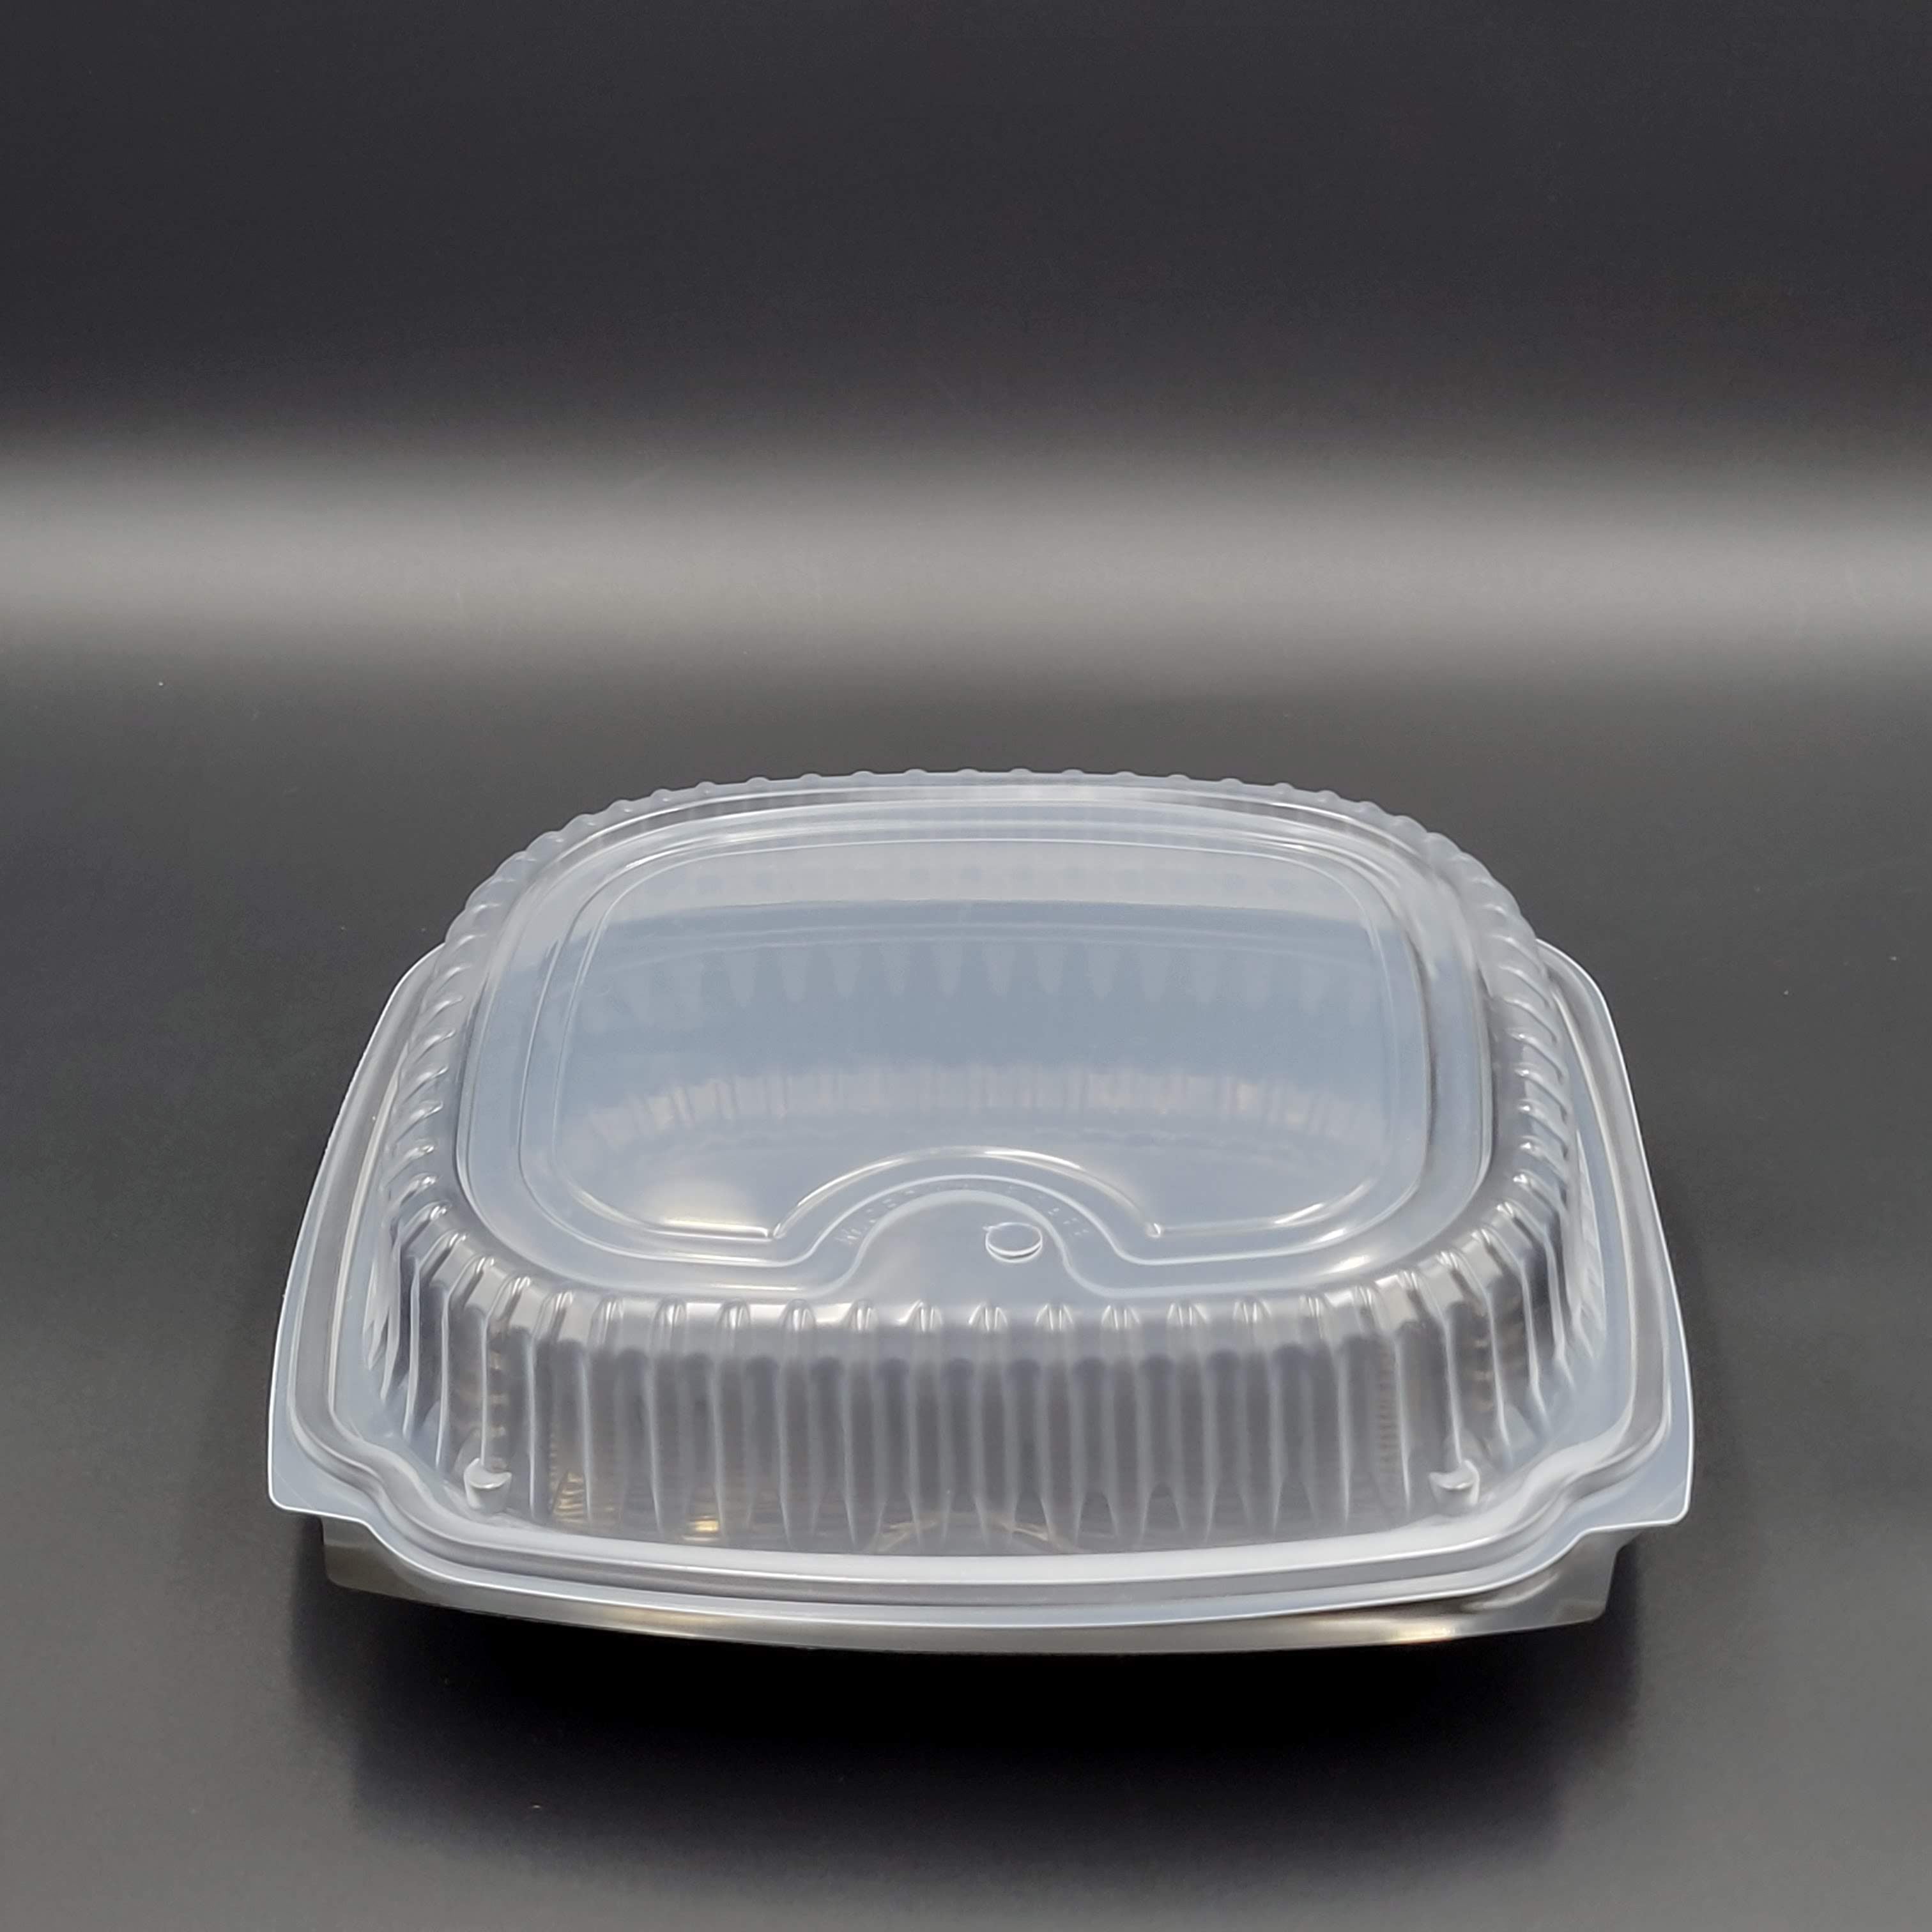 Rectangular plastic container - CON-MW-SKP-1000A - Microwaveable